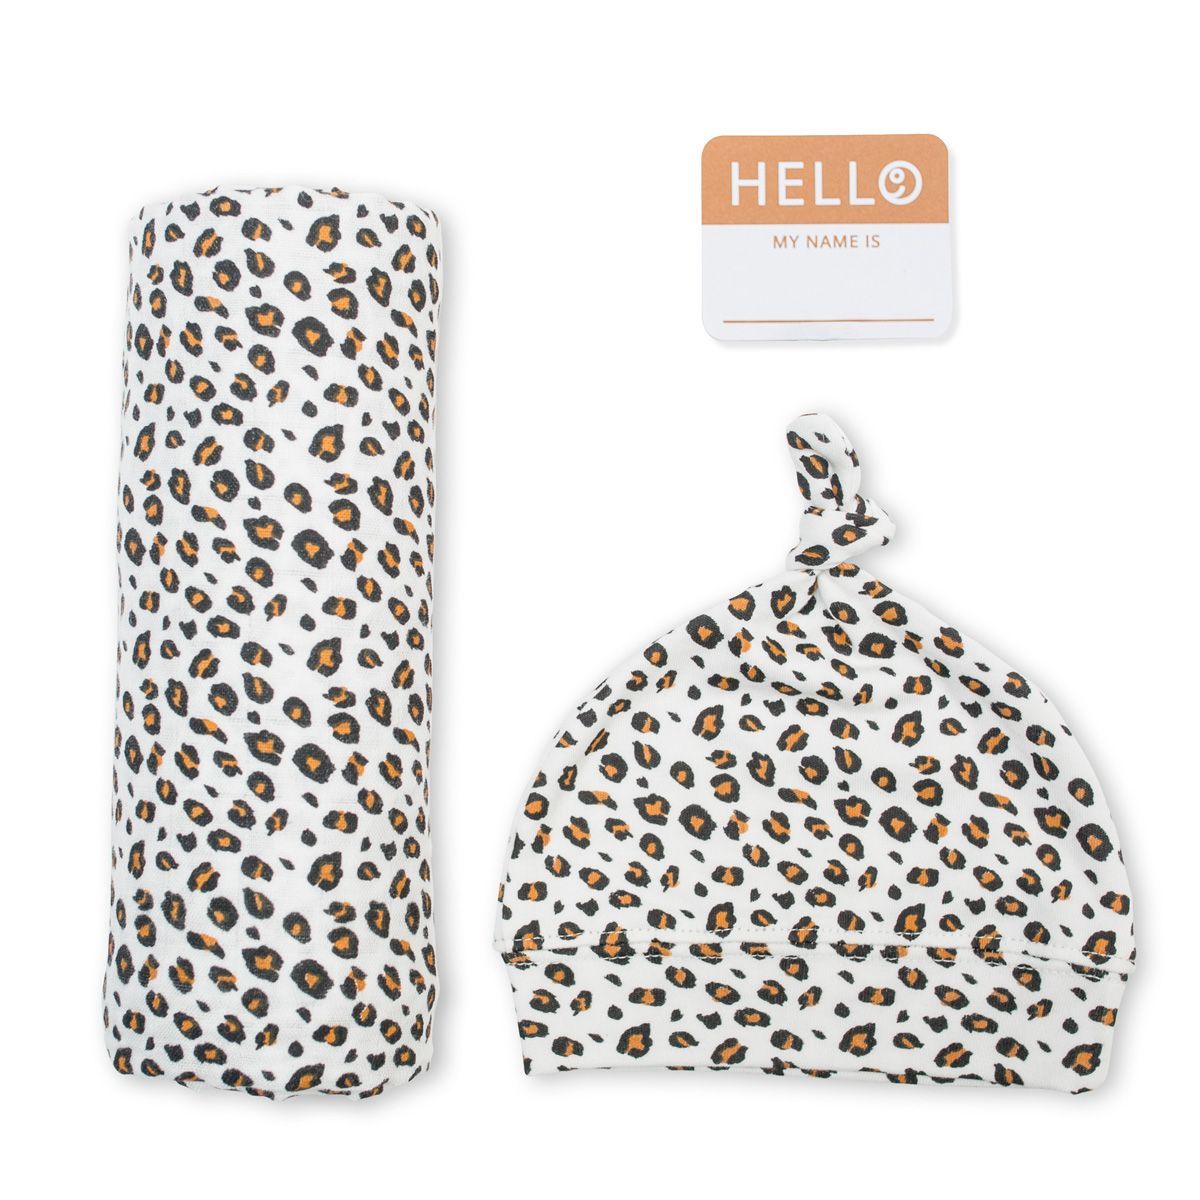 Lulujo Bamboo hat and swaddle blanket - Leopard